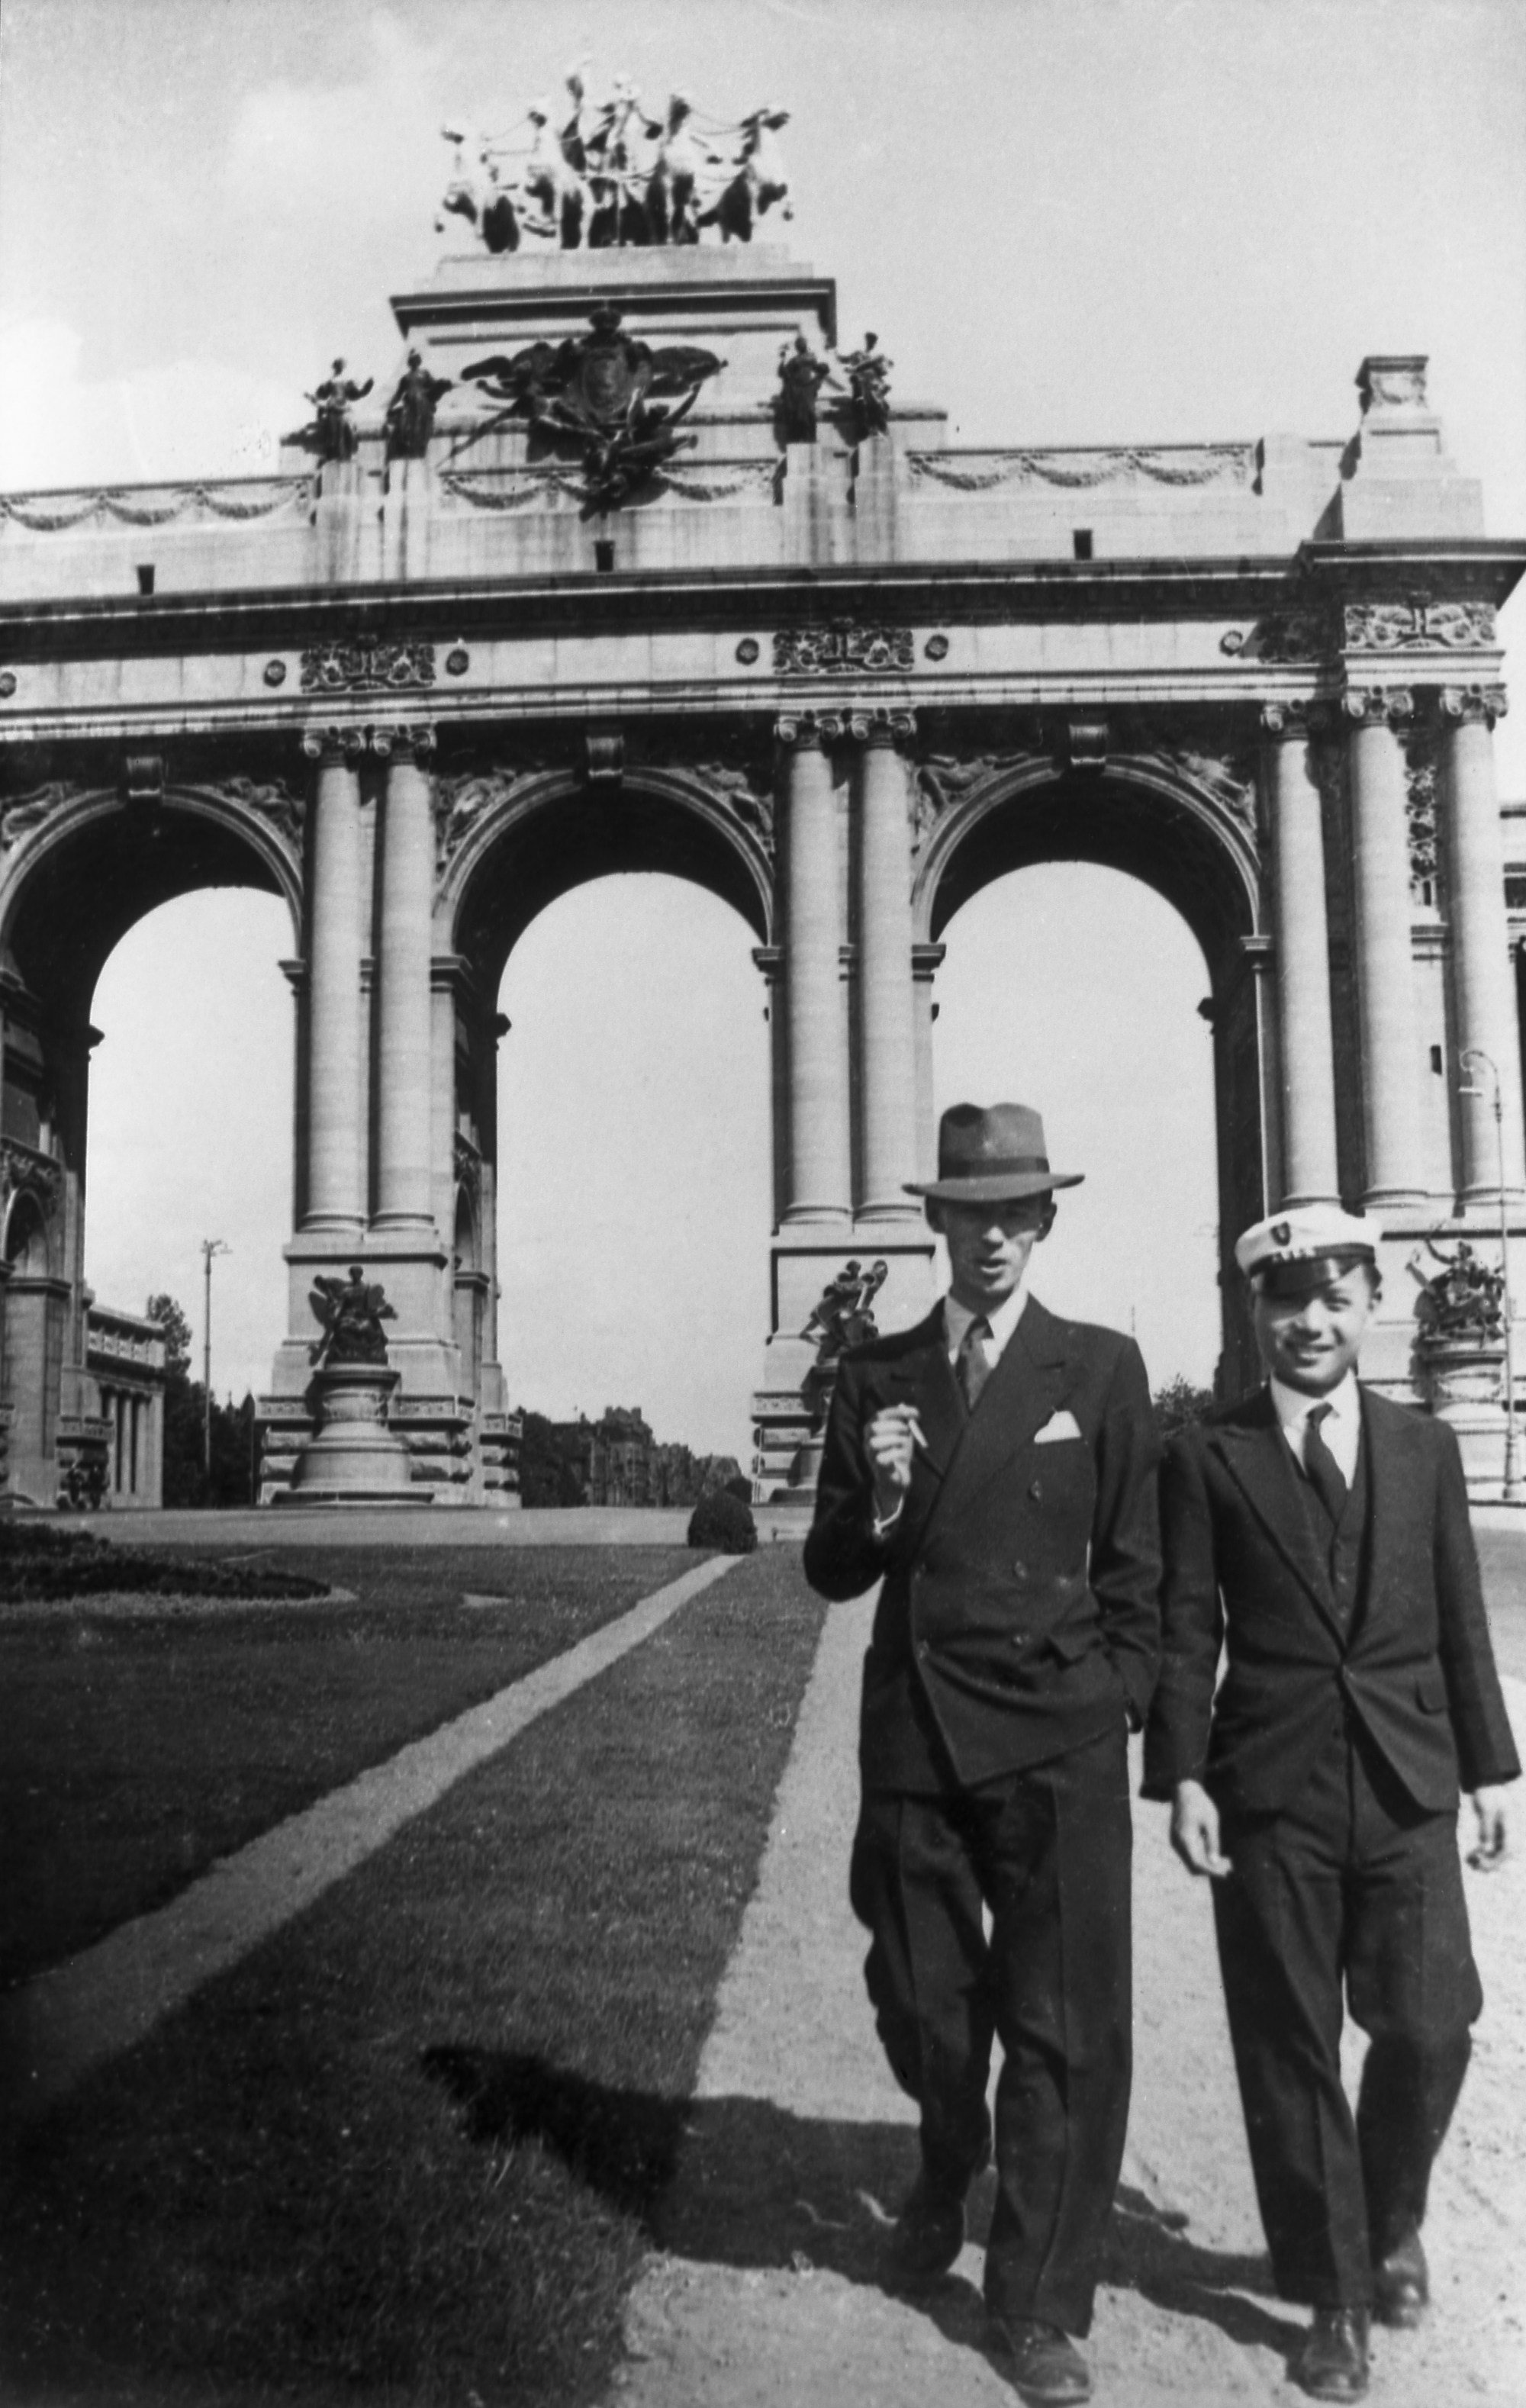 Belgian cartoonist Hergé (left) and Zhang at the Cinquantenaire Park in Brussels in the 1930s. Photo: Getty Images